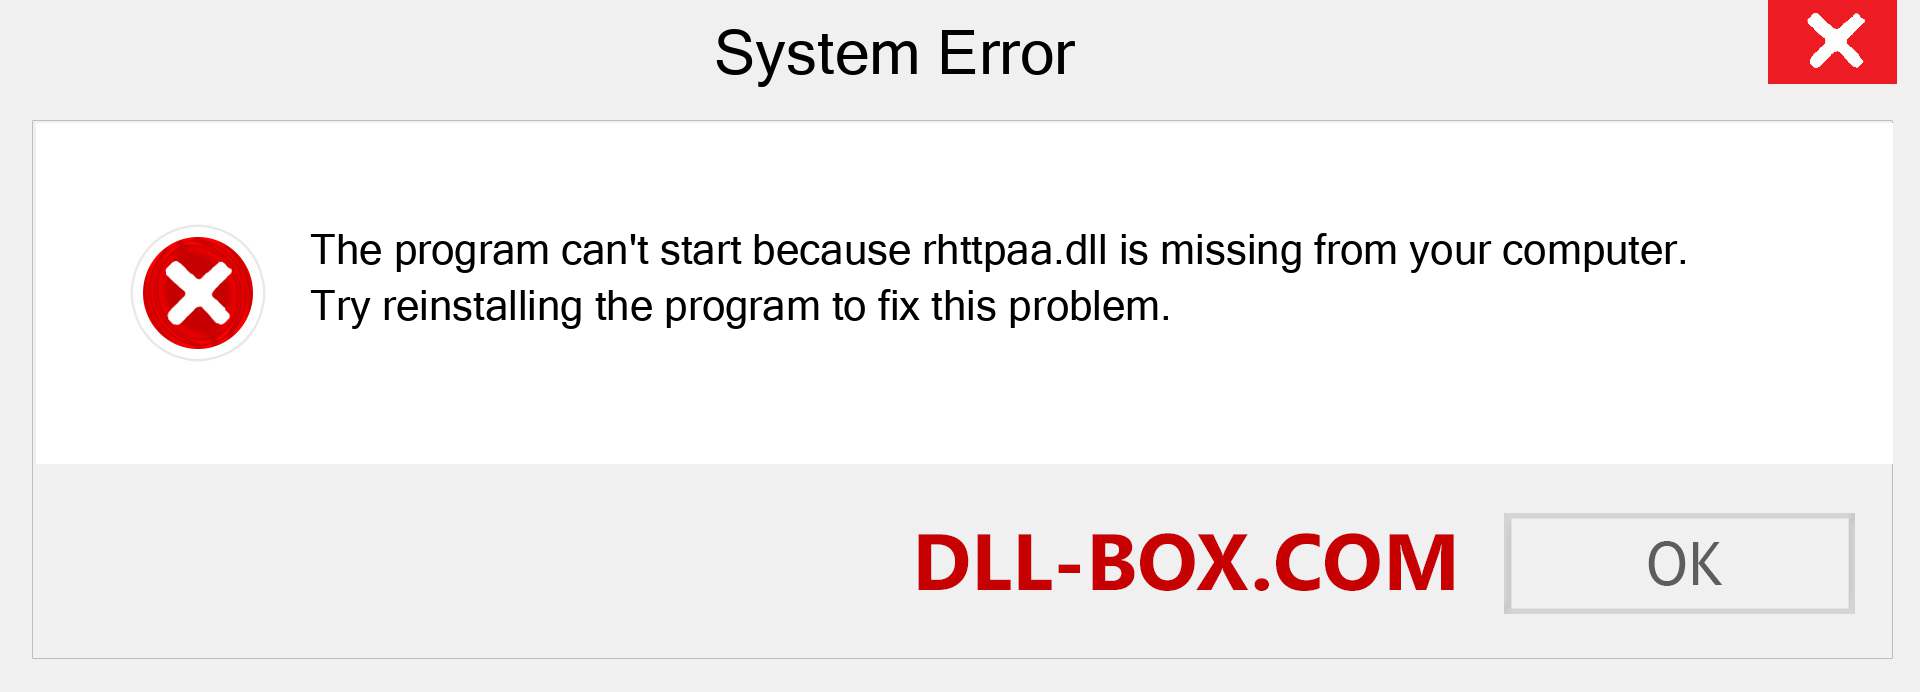  rhttpaa.dll file is missing?. Download for Windows 7, 8, 10 - Fix  rhttpaa dll Missing Error on Windows, photos, images